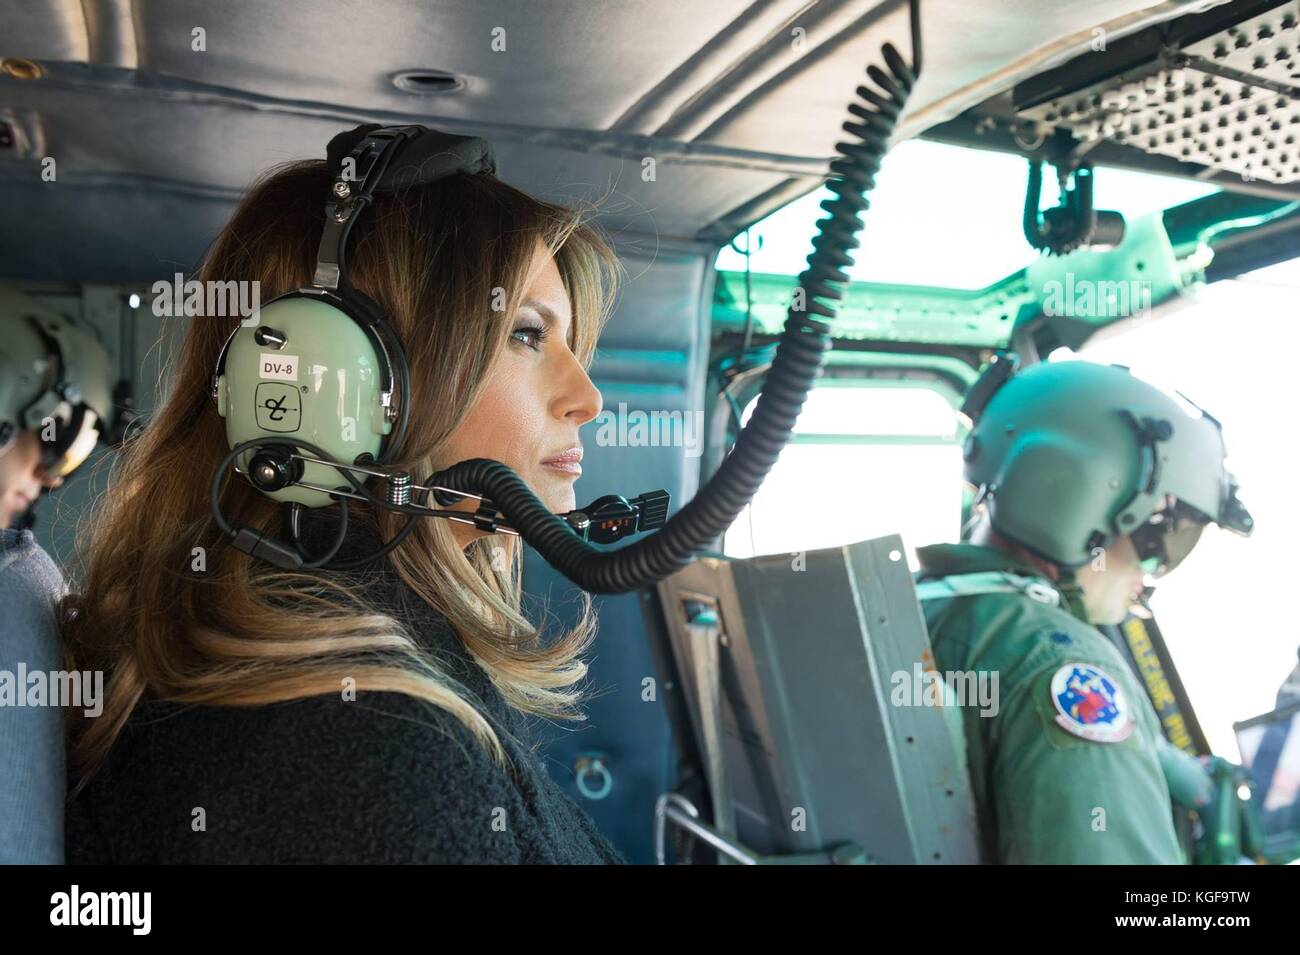 U.S first lady Melania Trump, left, wears headsets during a military helicopter flight from Yokota Air Base to join Akie Abe at the Mikimoto Pearl flagship store in Ginza November 5, 2017 in Tokyo, Japan. Trump is on a three-day visit to Japan, the first stop of a 13-day swing through Asia. Stock Photo